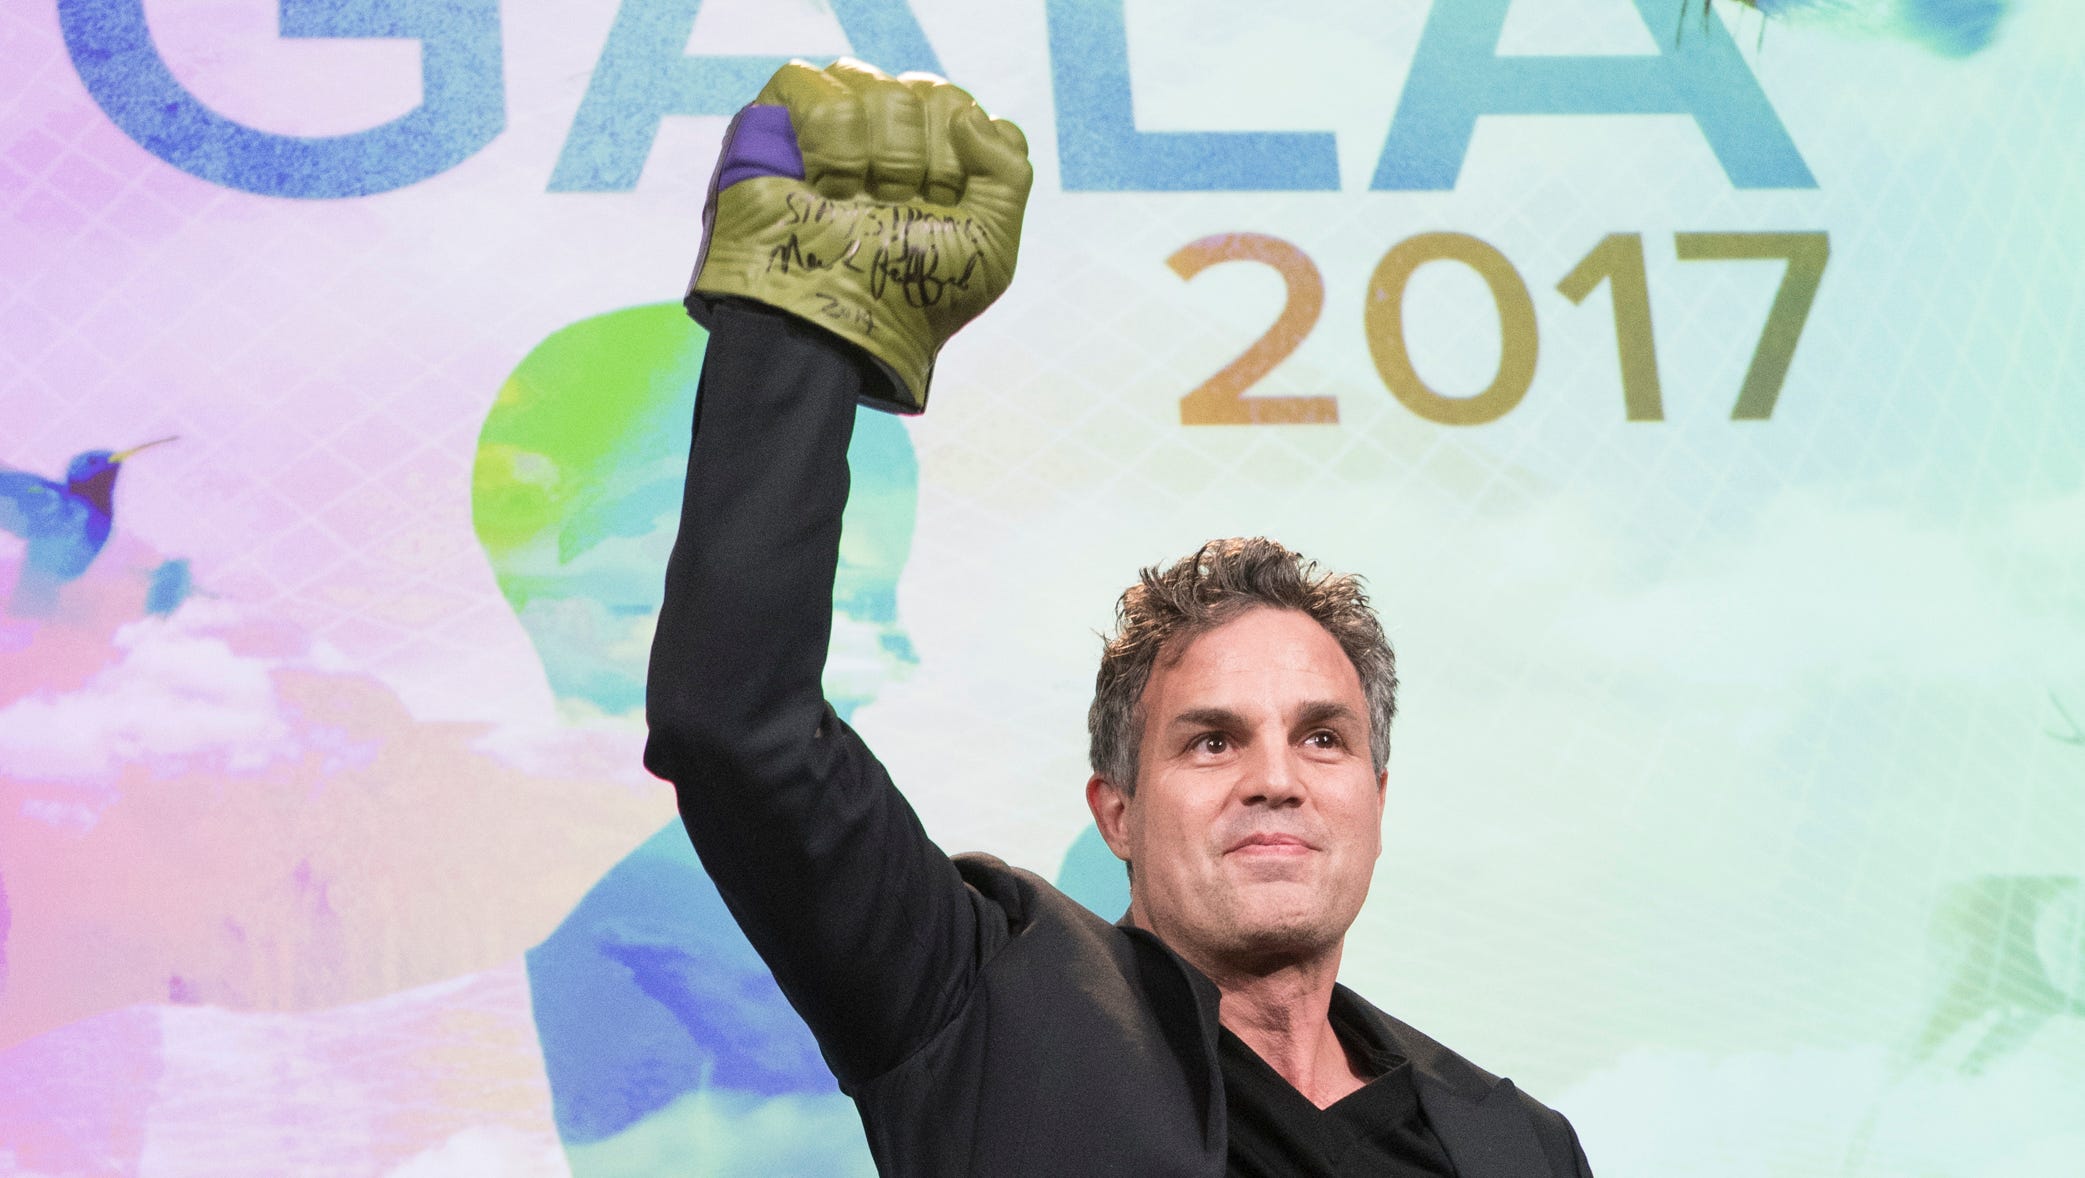 Mark Ruffalo, Alyssa Milano plan 'People's State of the Union' counter-events